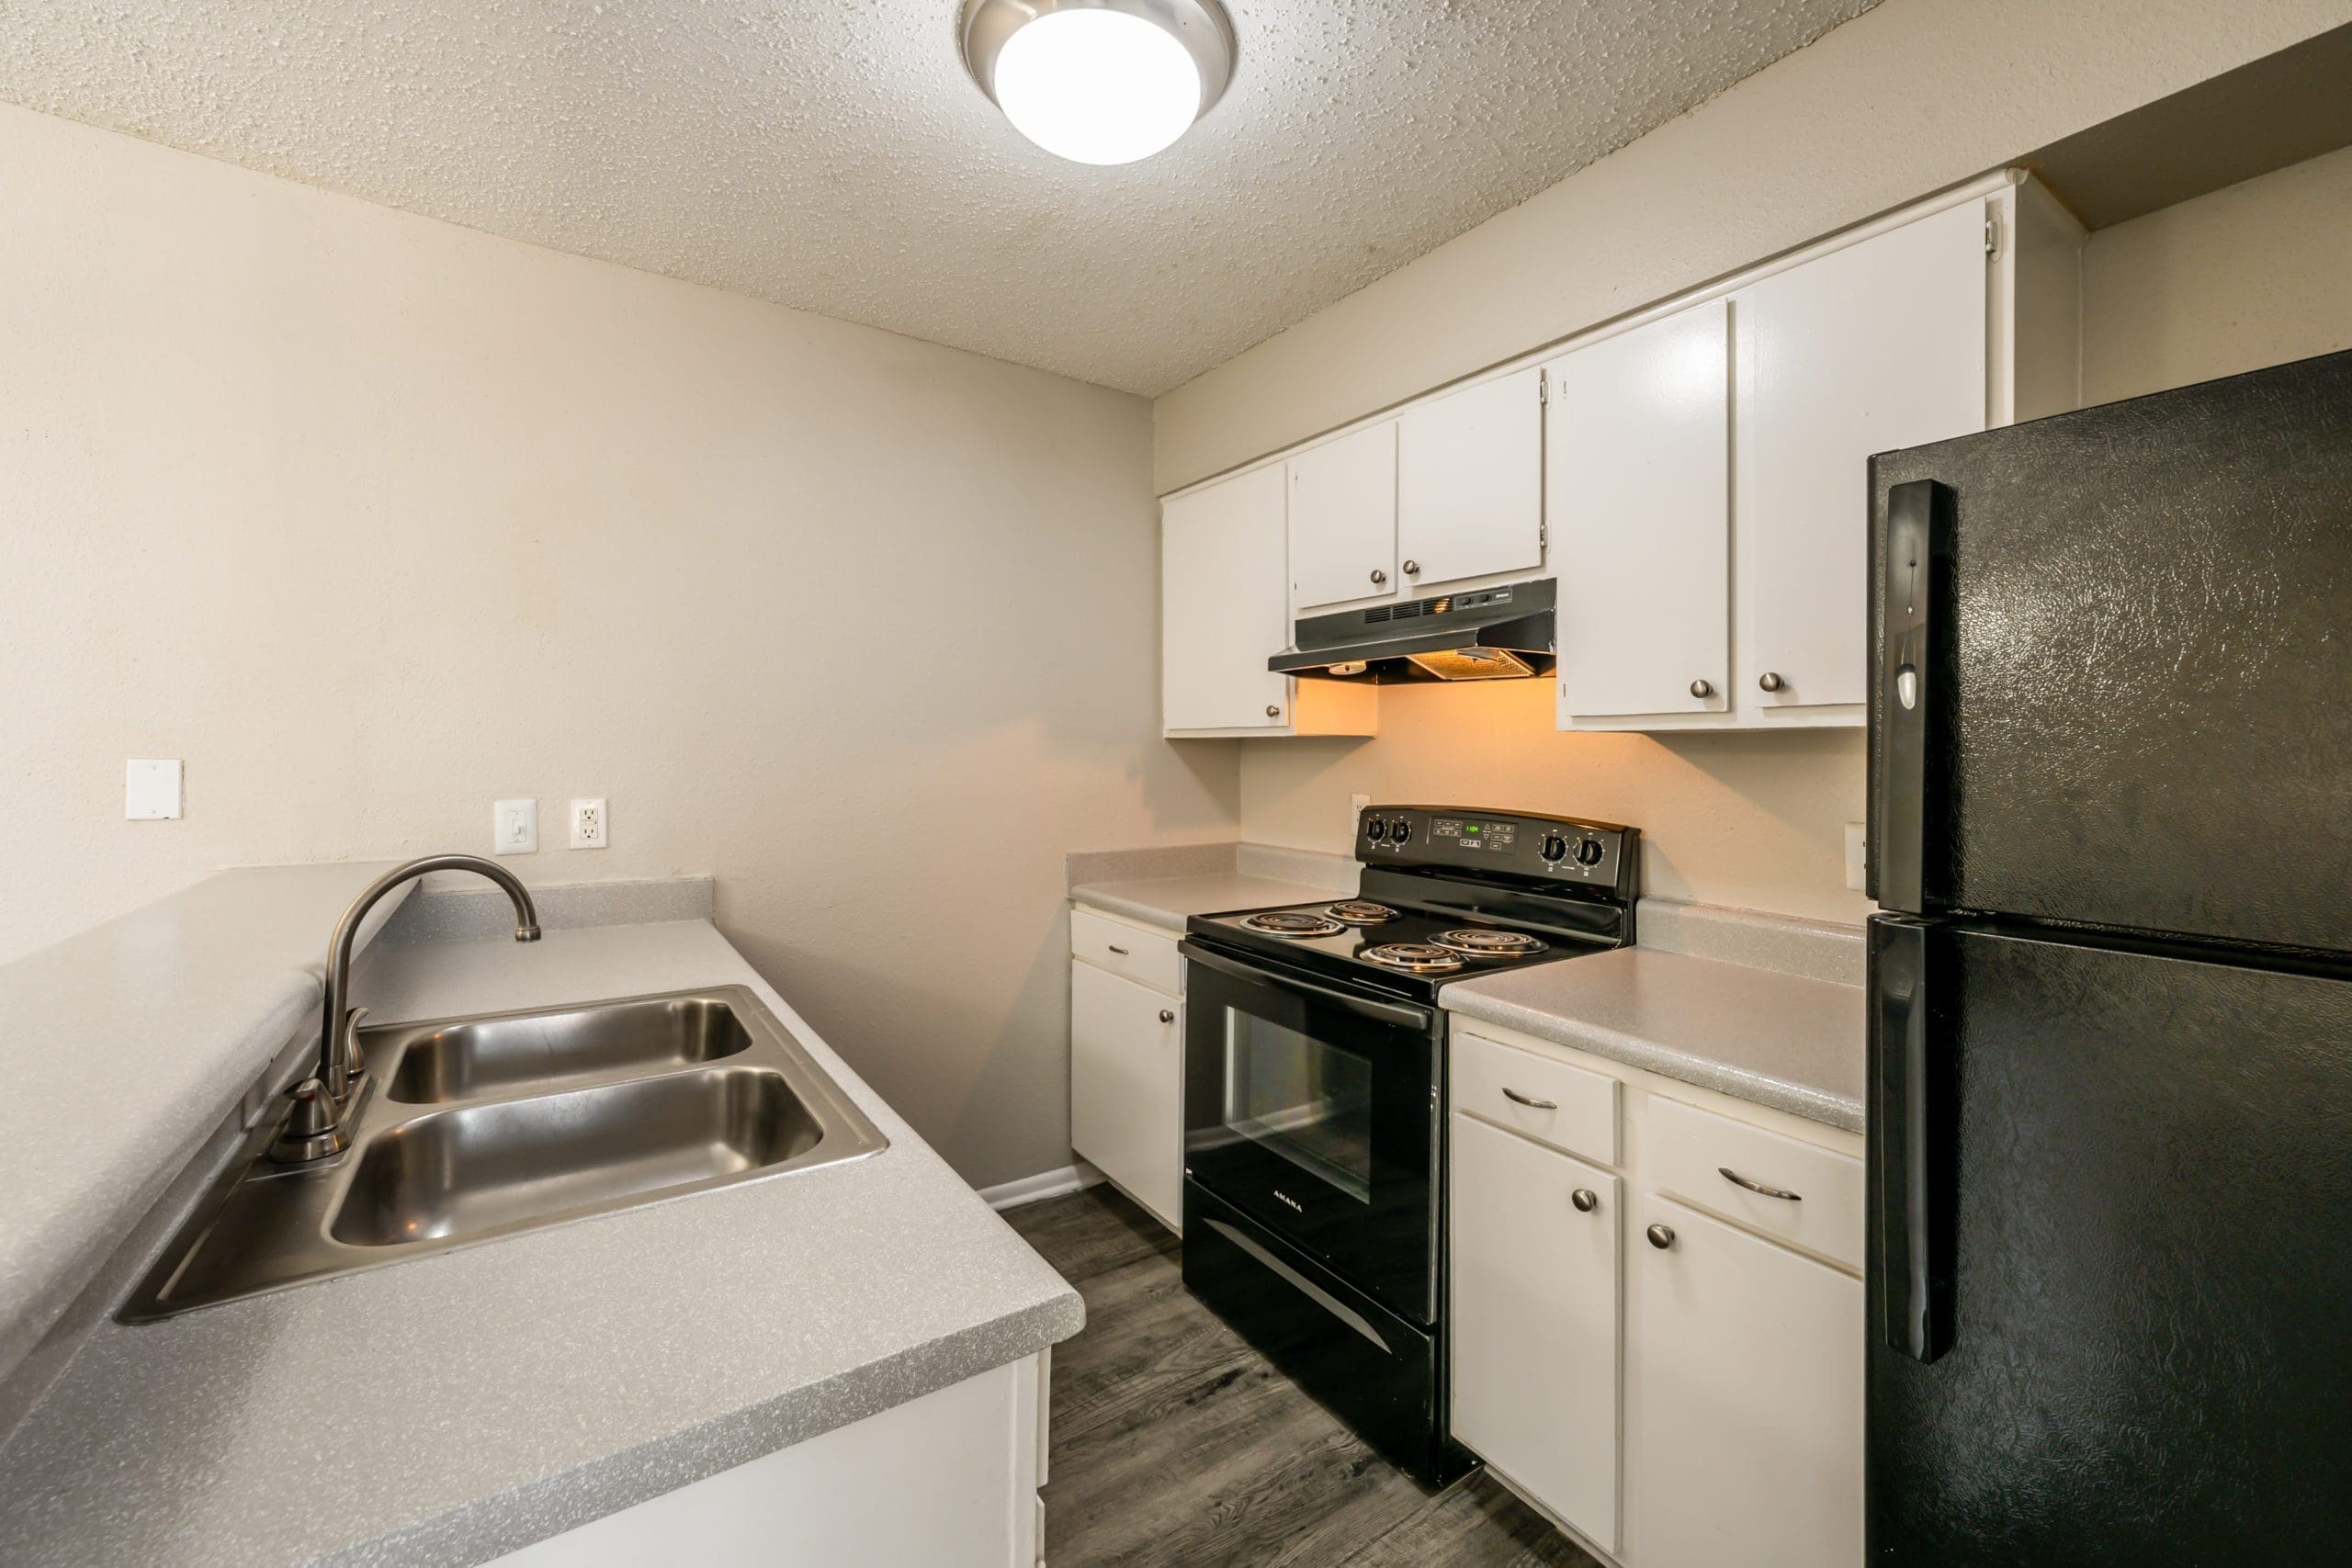 Pet-Friendly Apartments in San Antonio, TX - City-Base Vista - Kitchen Area with Black Appliances, Spacious Counterspace, and White Cabinets